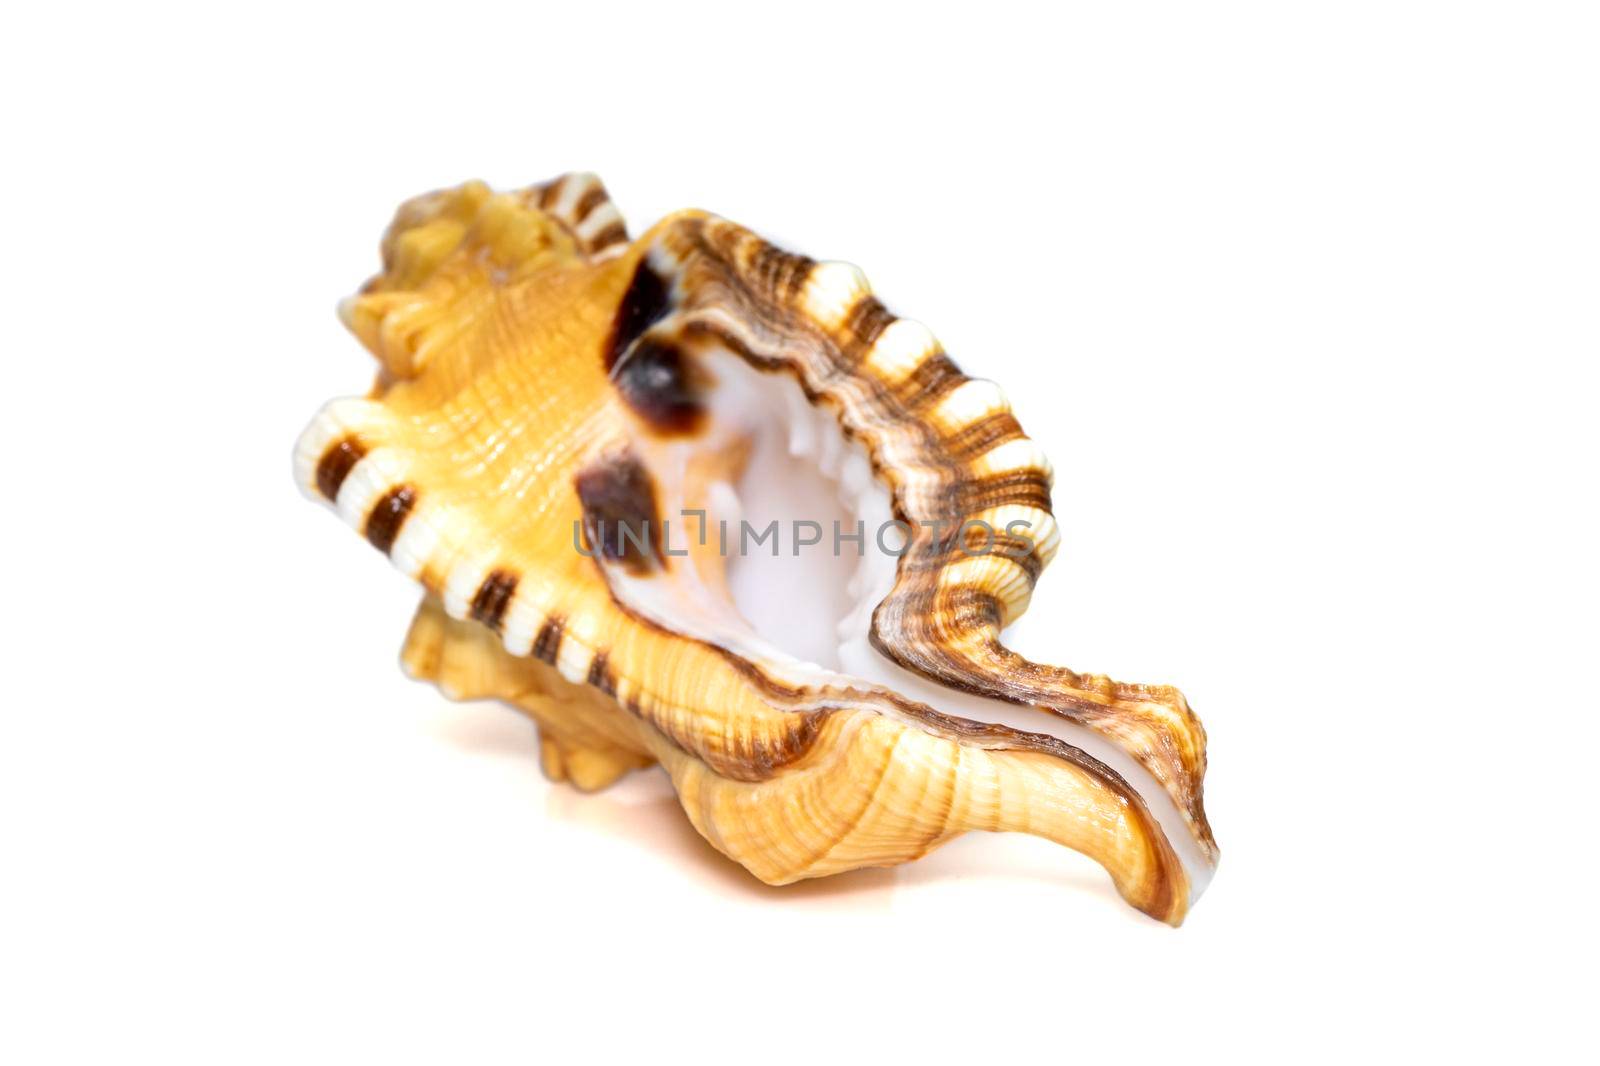 Image of lotoria lotoria sea shells, common name the black-spotted snail or washing bath triton isolated on white background. Sea snail. Undersea Animals. Sea Shells. by yod67